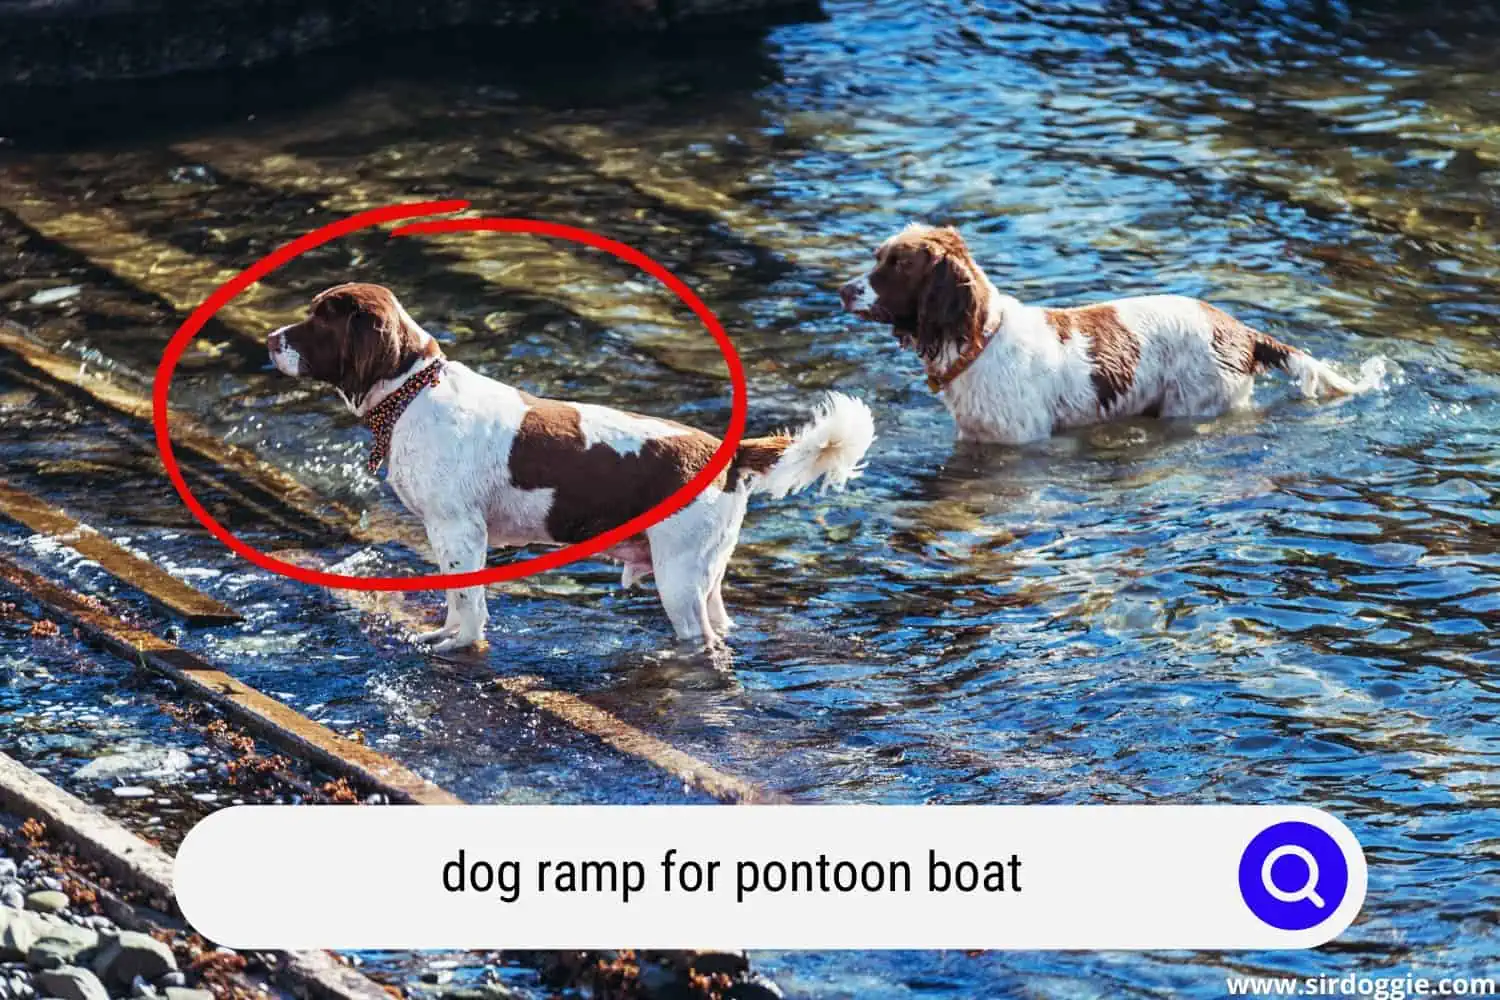 Two dogs ramping for a pontoon boat 